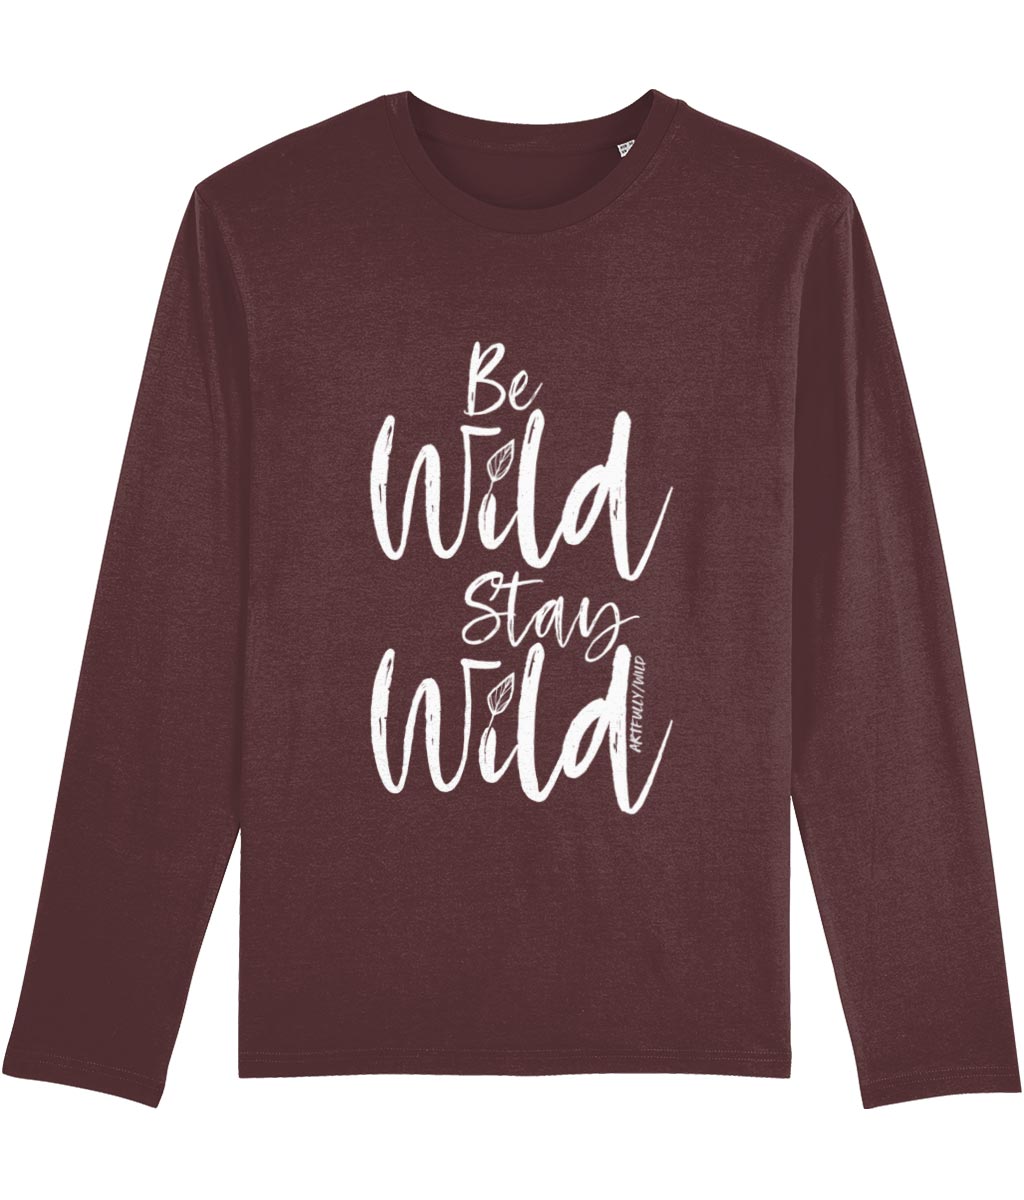 ‘BE WILD STAY WILD’ Men's Burgundy Long-Sleeved T-Shirt. Certified organic cotton. White slogan print with water-based inks.